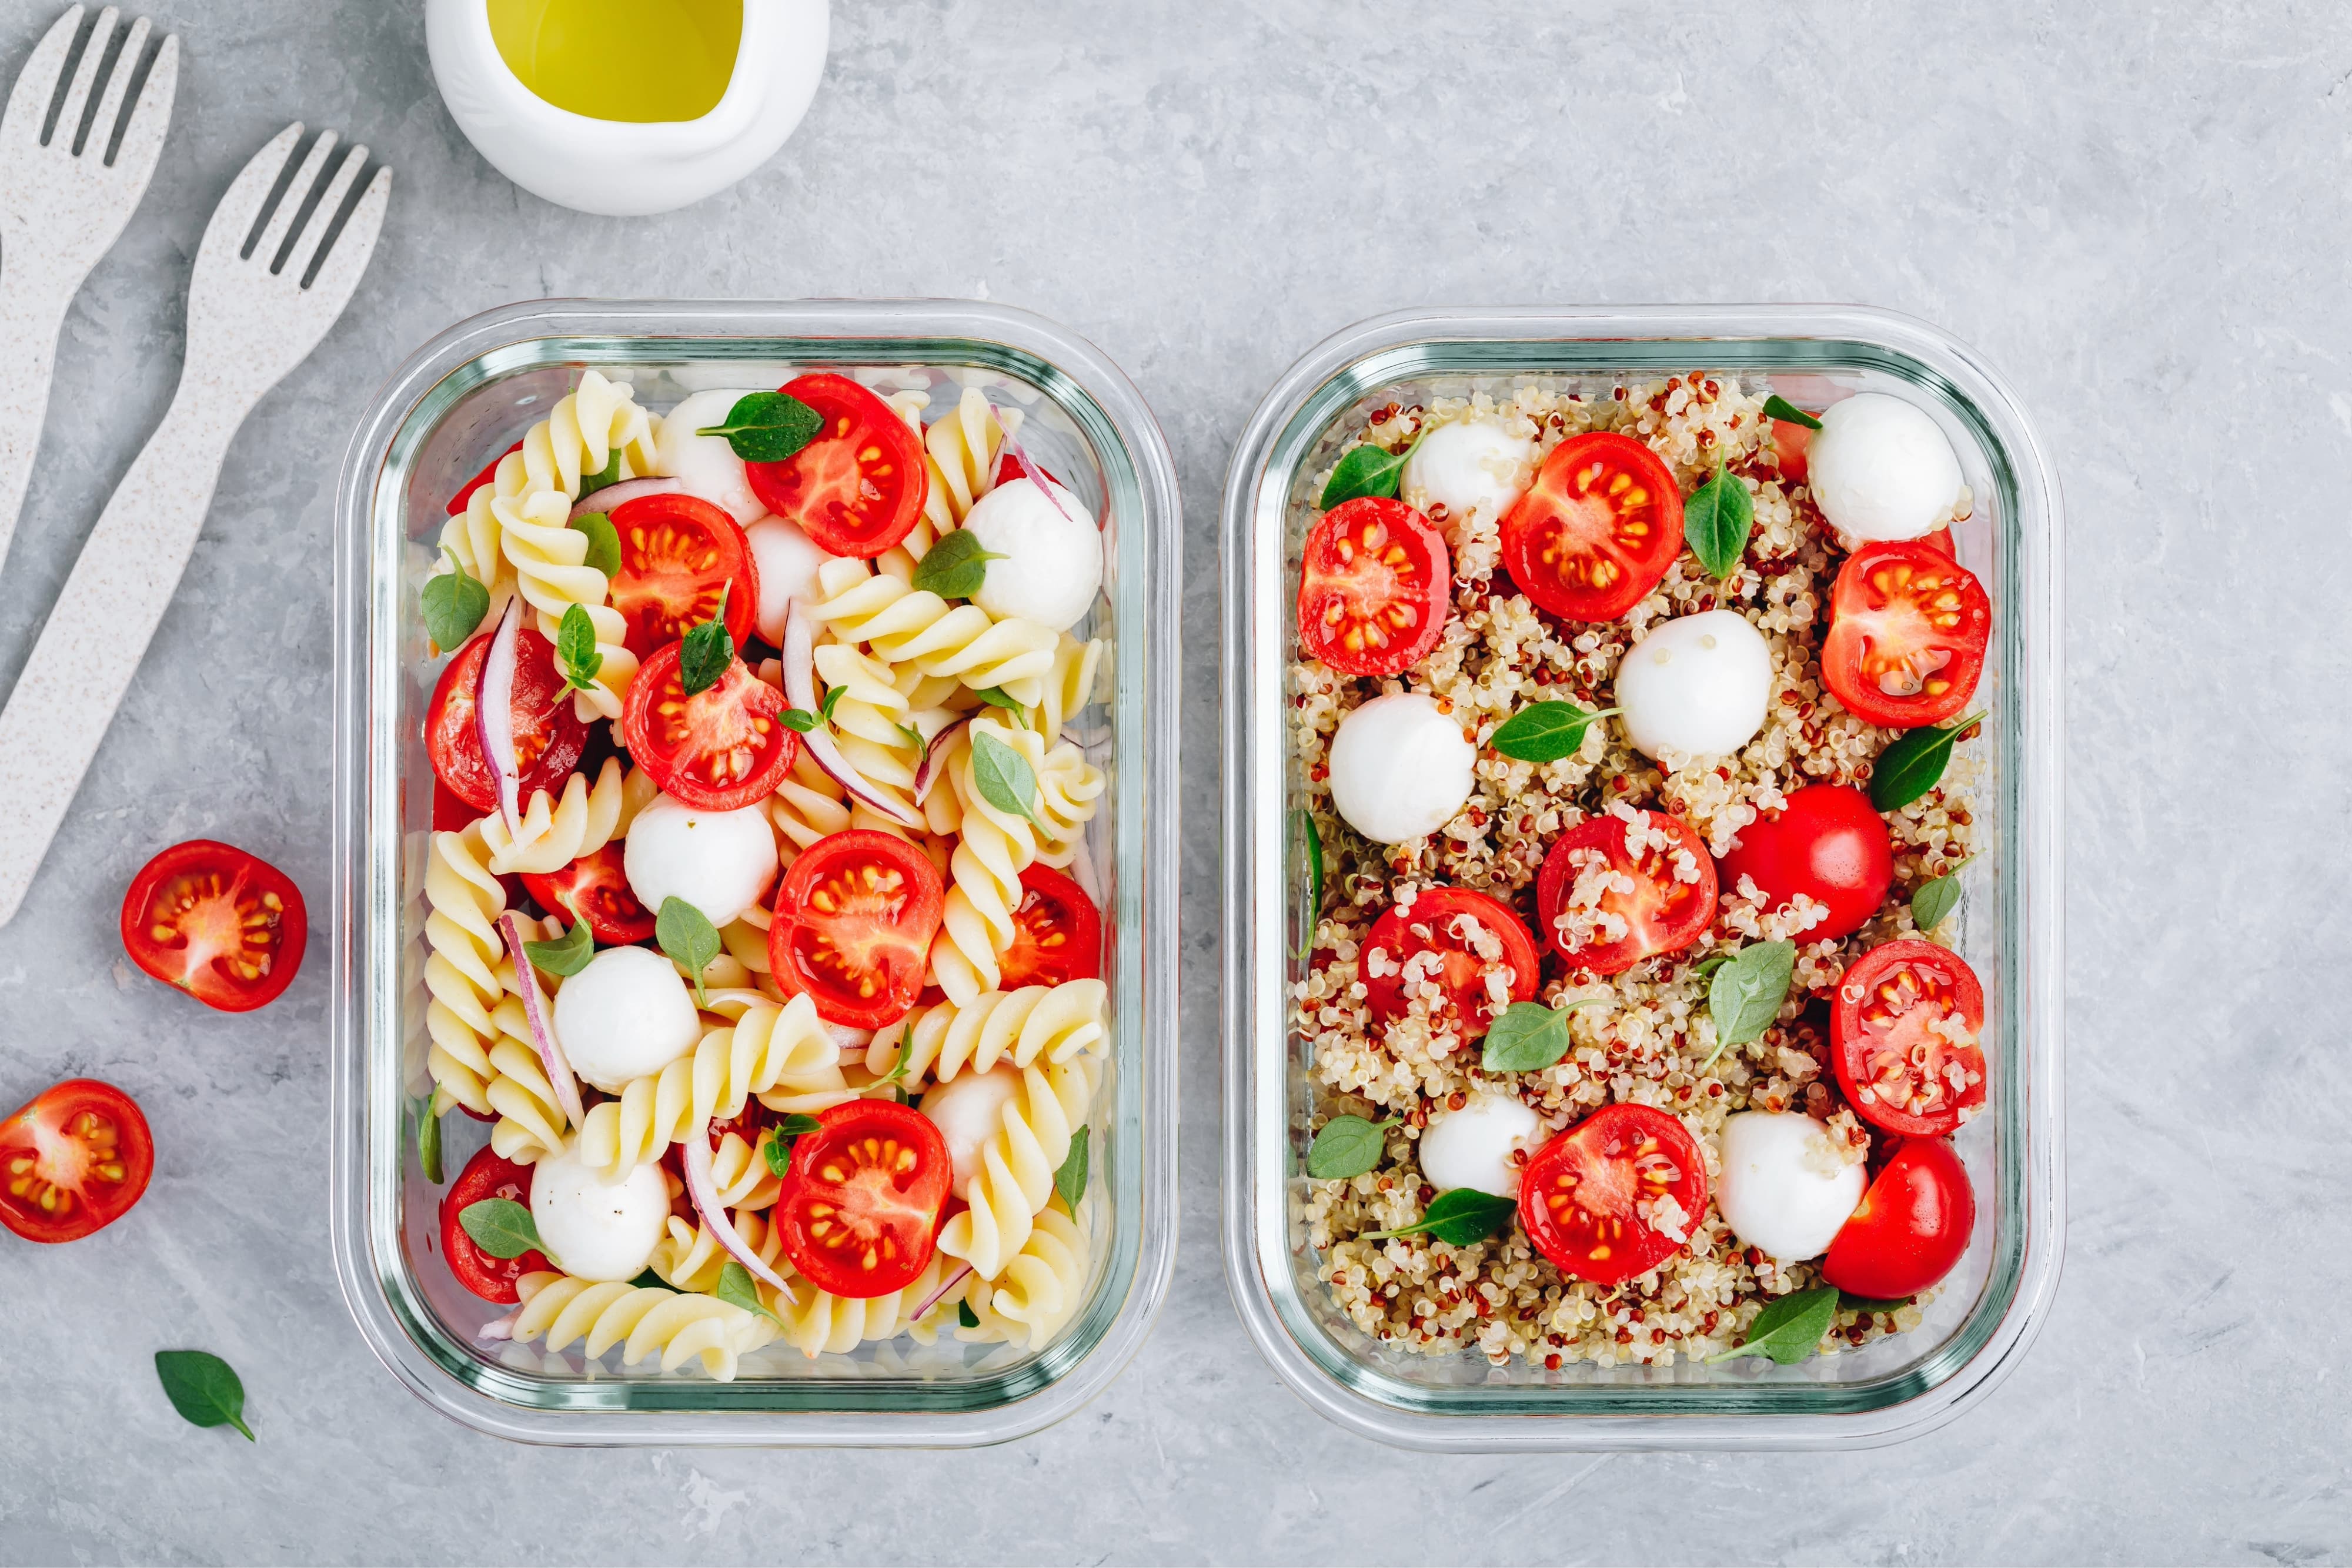 Meal prep containers with pasta salad or quinoa, tomatoes, mozzarella cheese, and basil